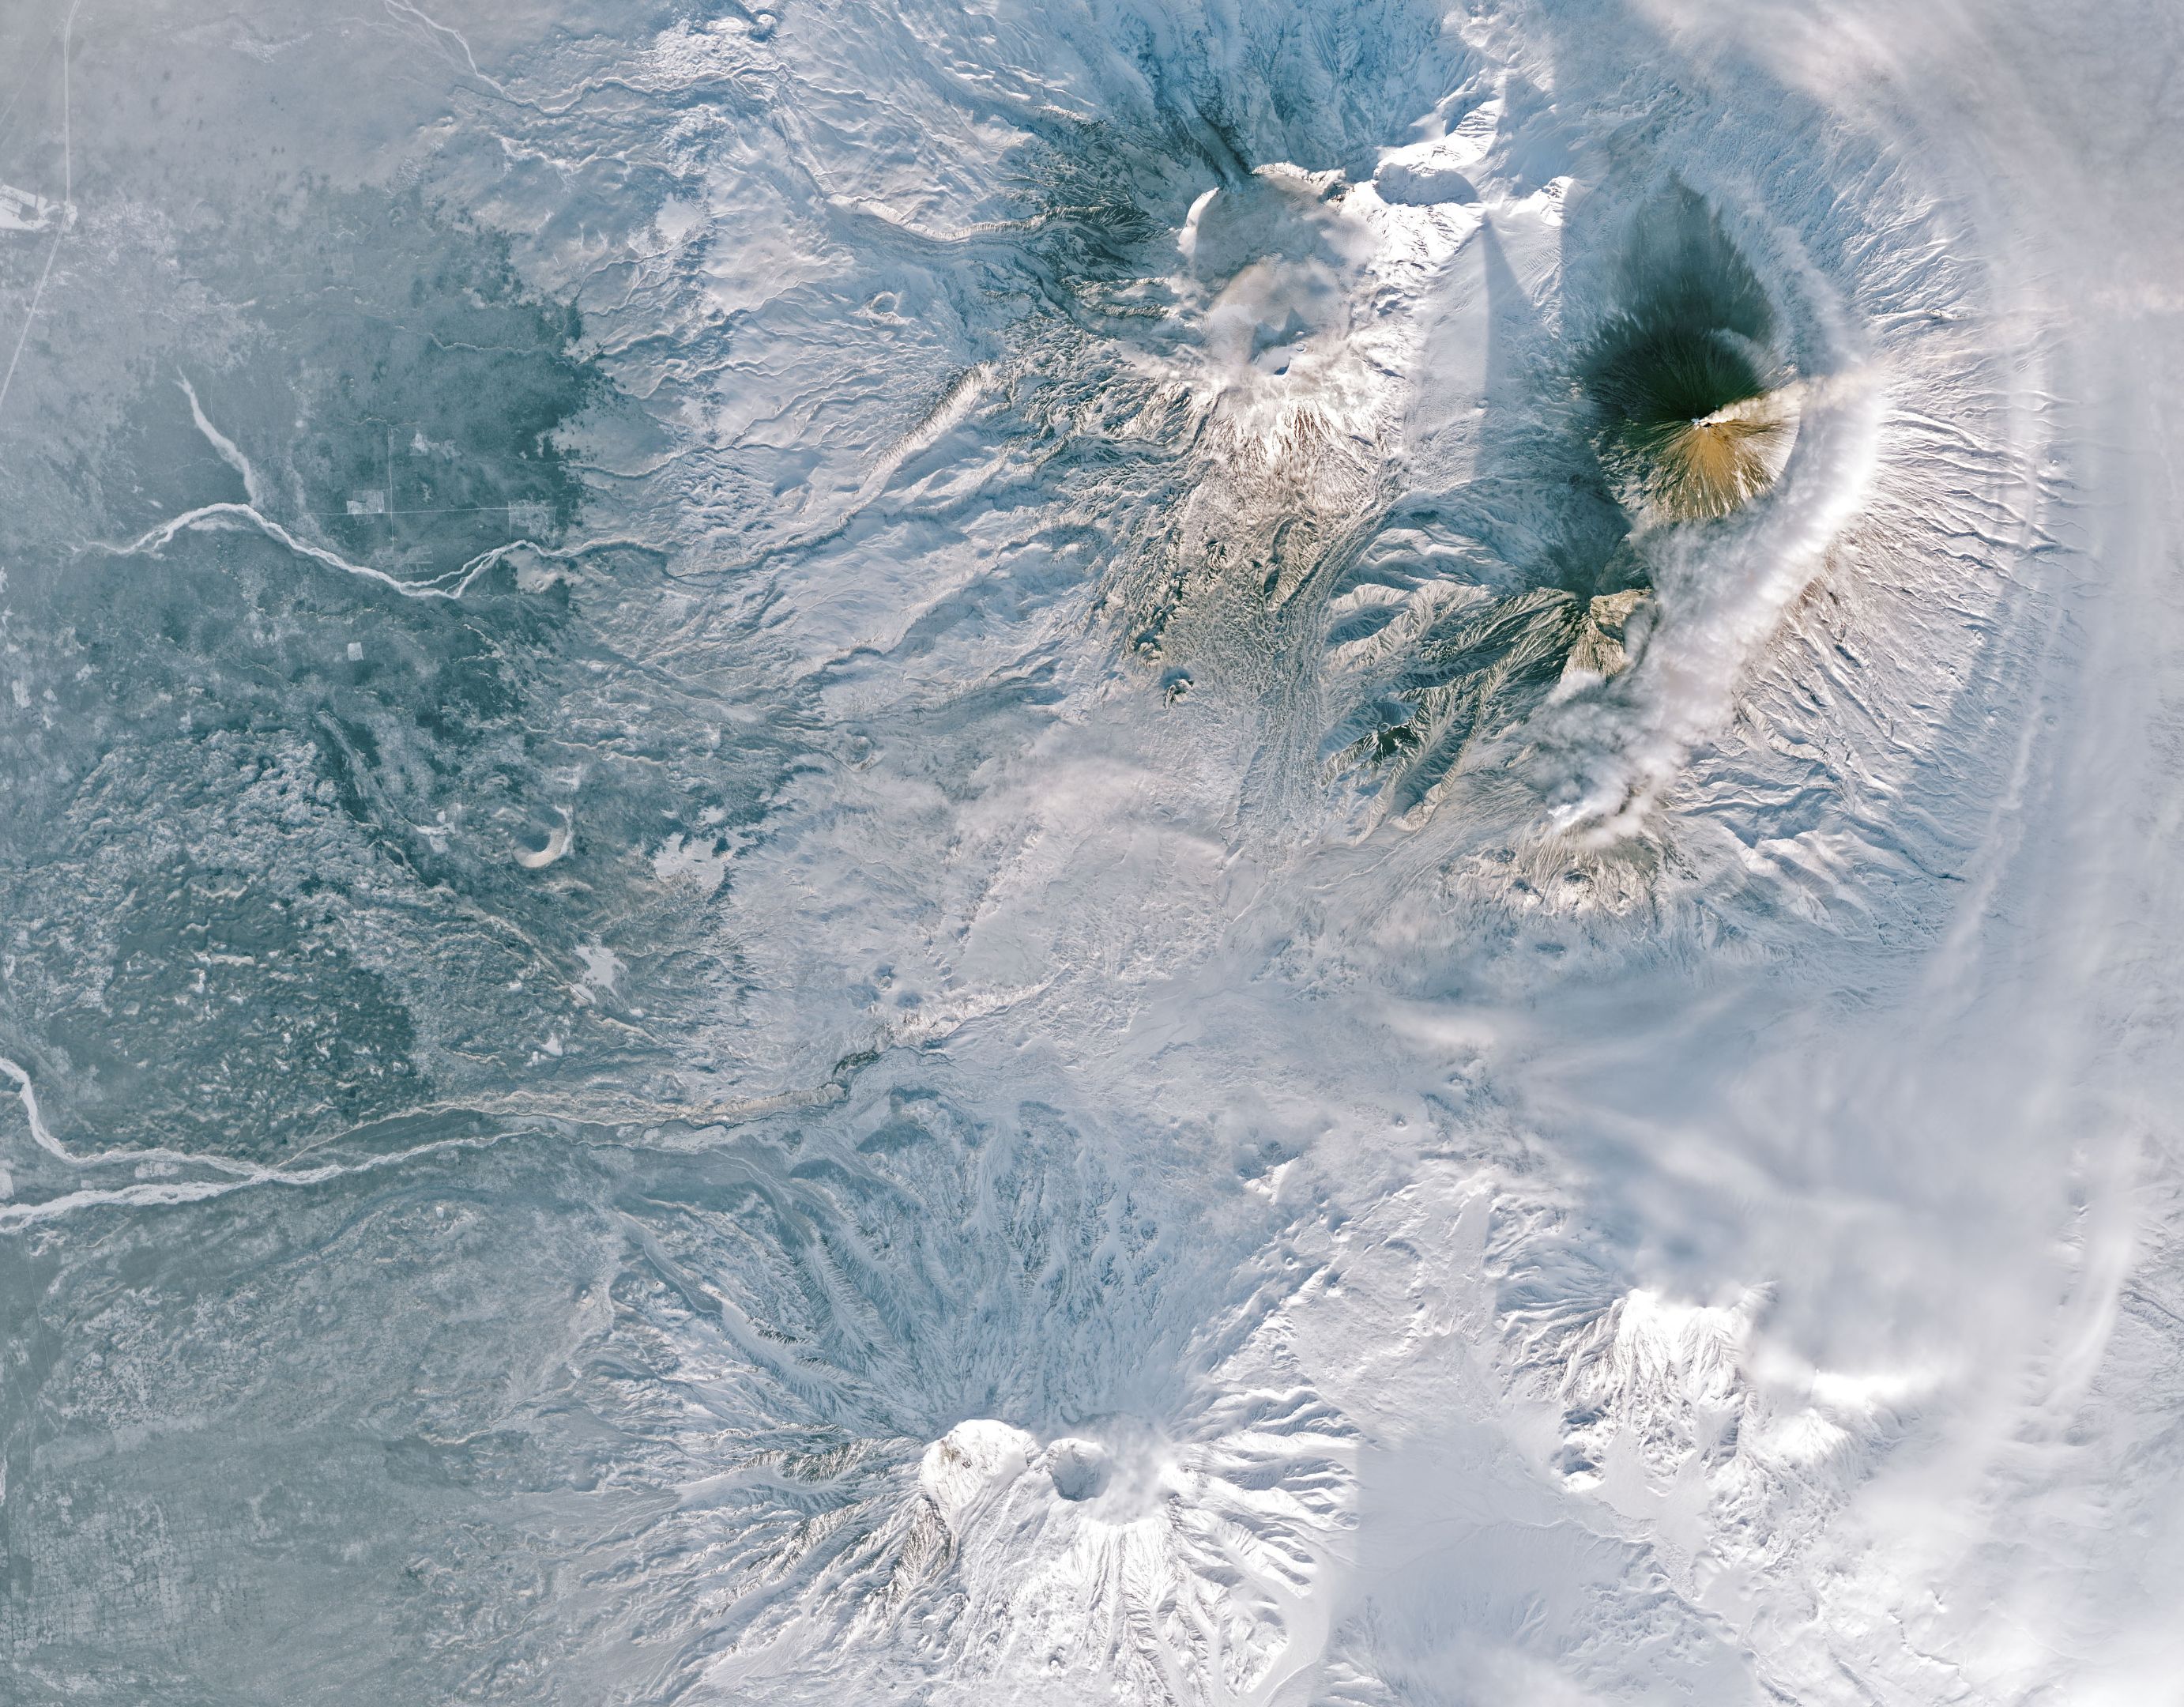 A birds-eye view of an active volcano smoking, surrounded by a snowy landscape.